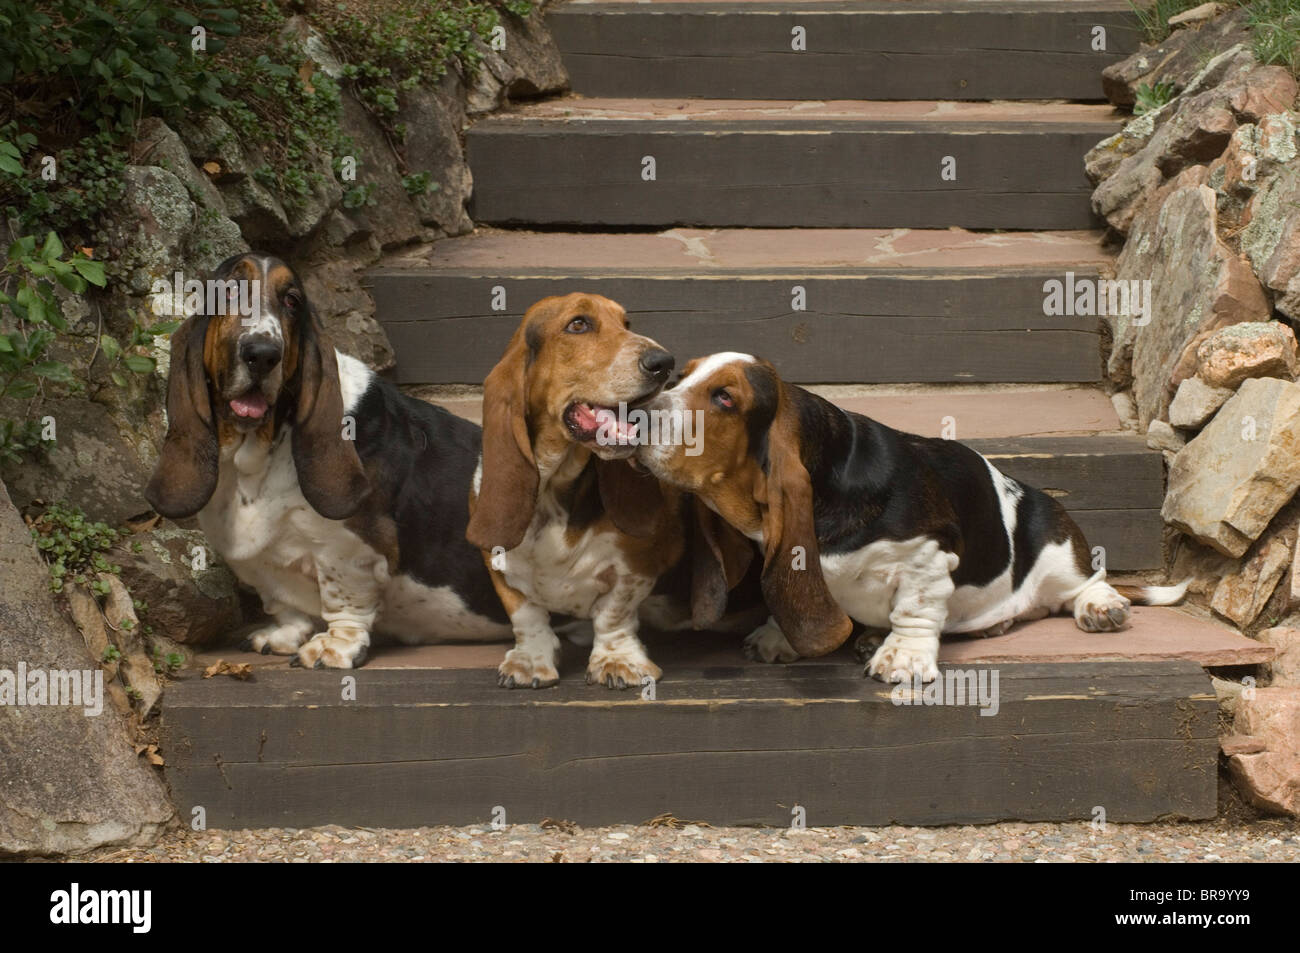 THREE BASSET HOUNDS ON OUTDOOR STEPS Stock Photo